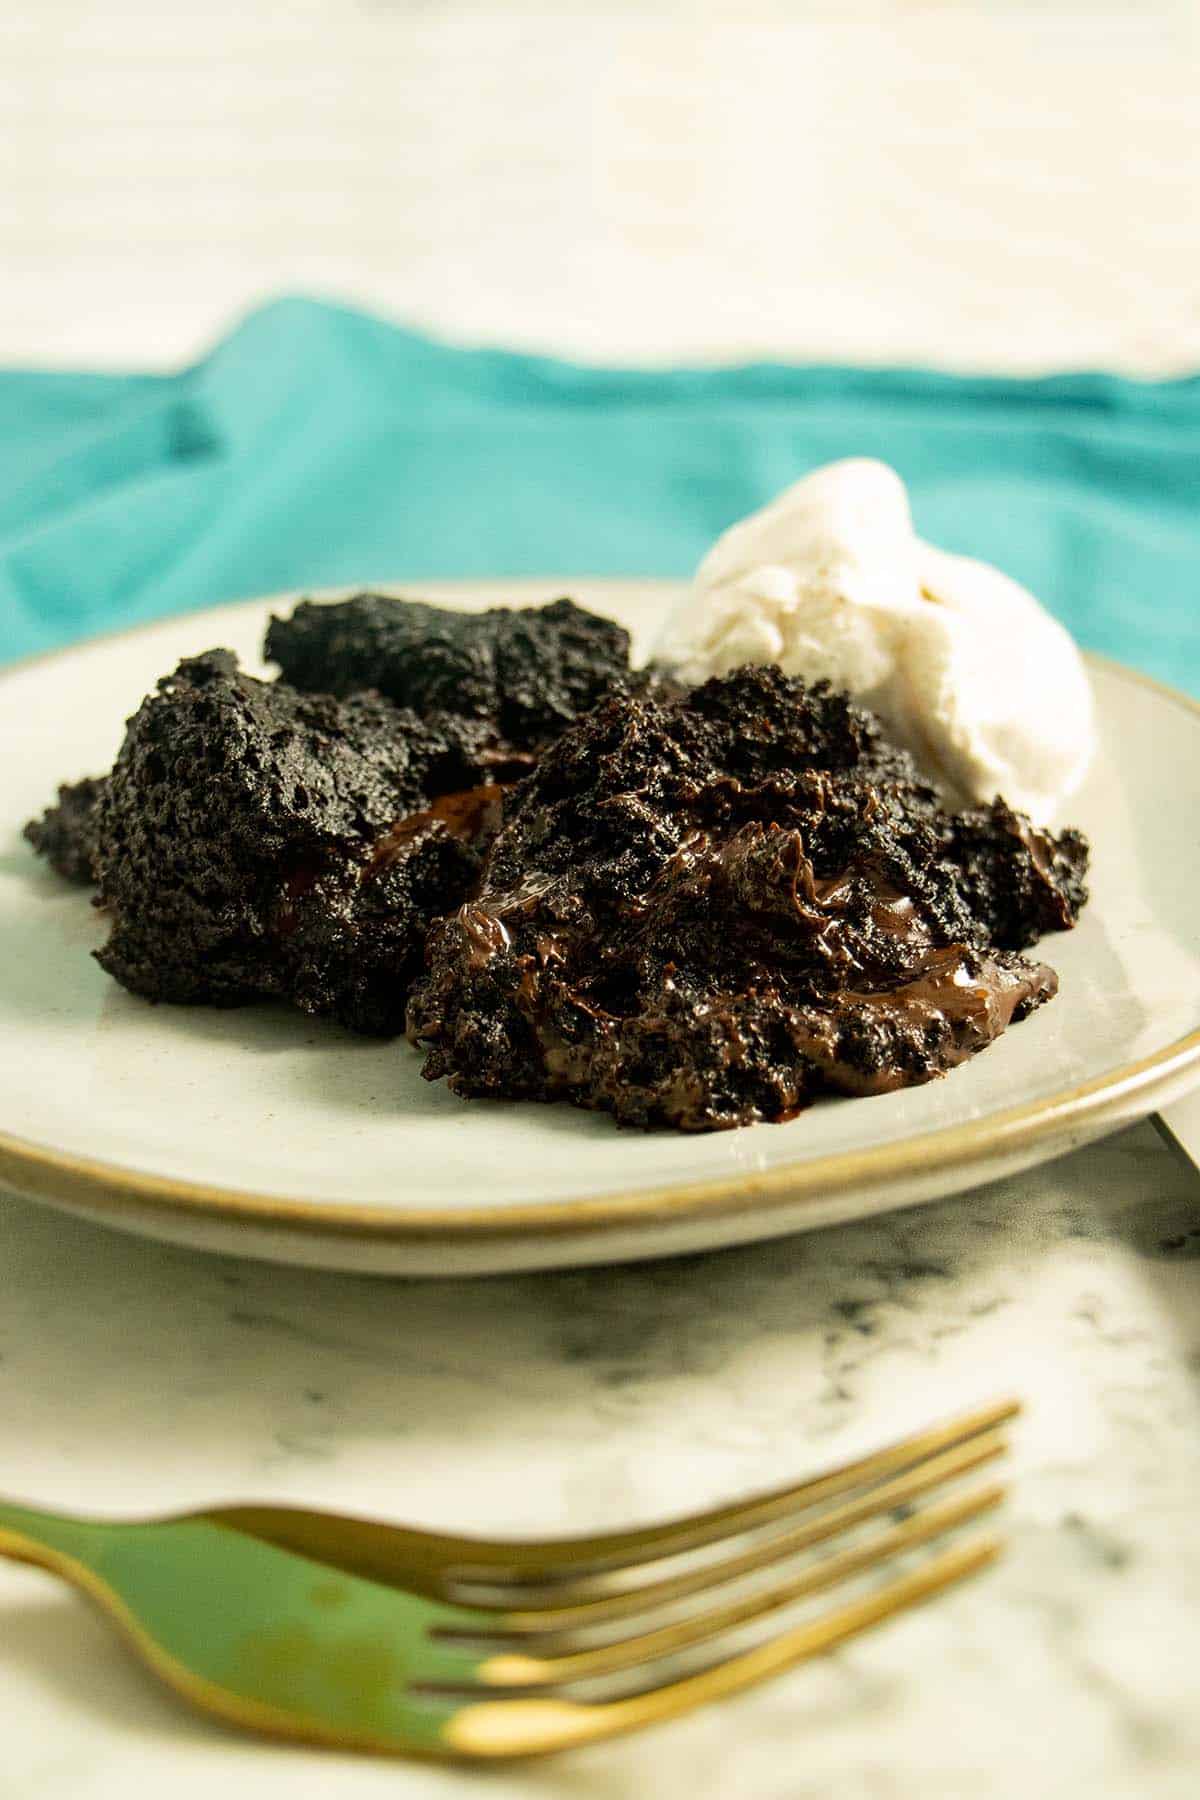 Instant Pot brownies on a plate with vanilla ice cream